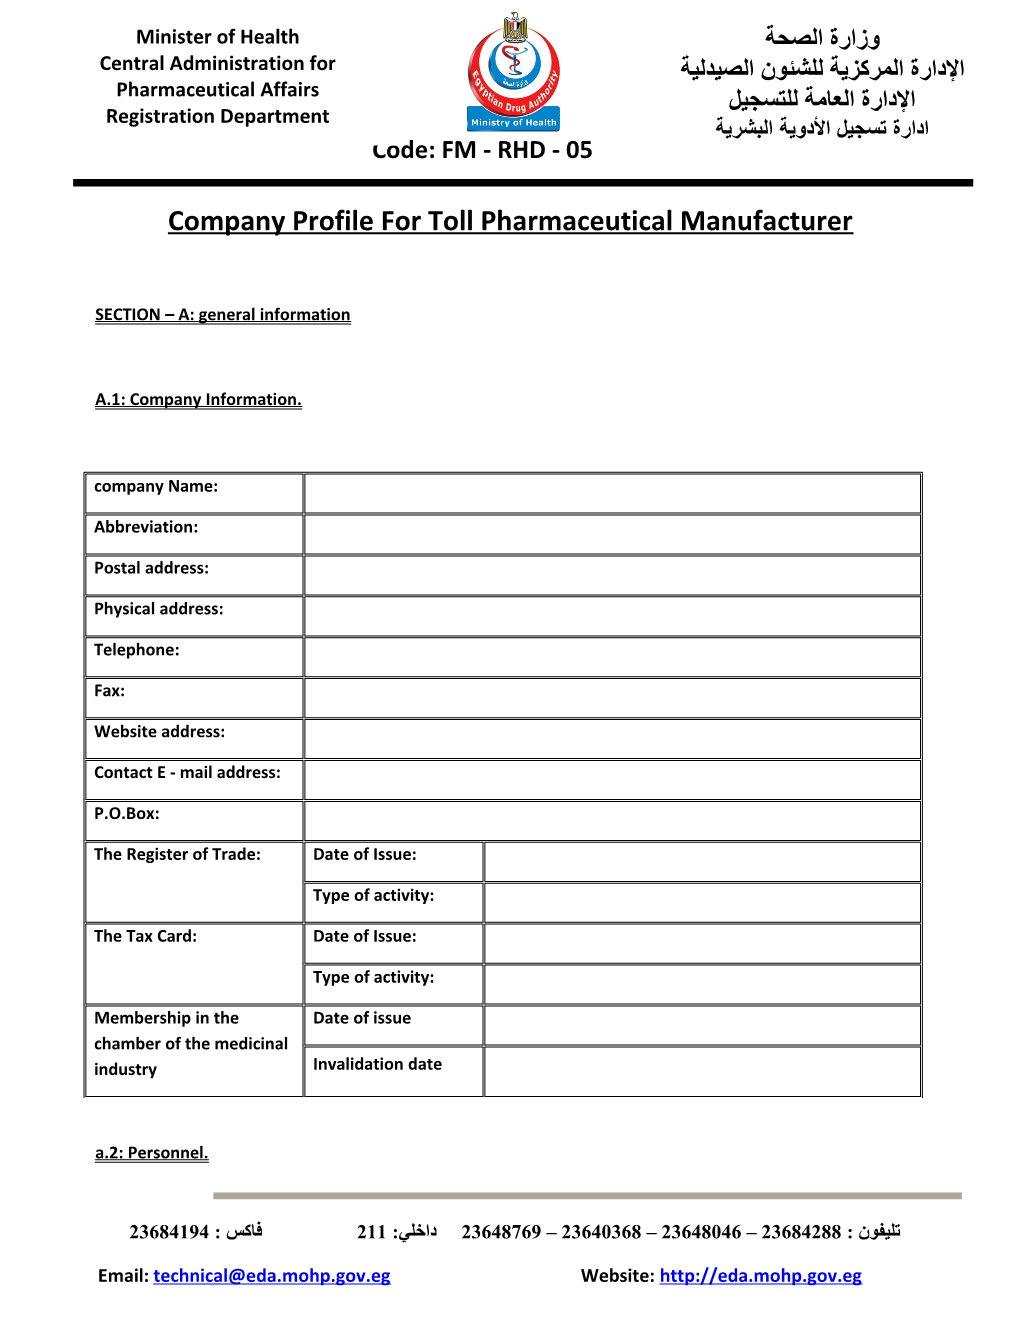 Company Profile for Toll Pharmaceutical Manufacturer